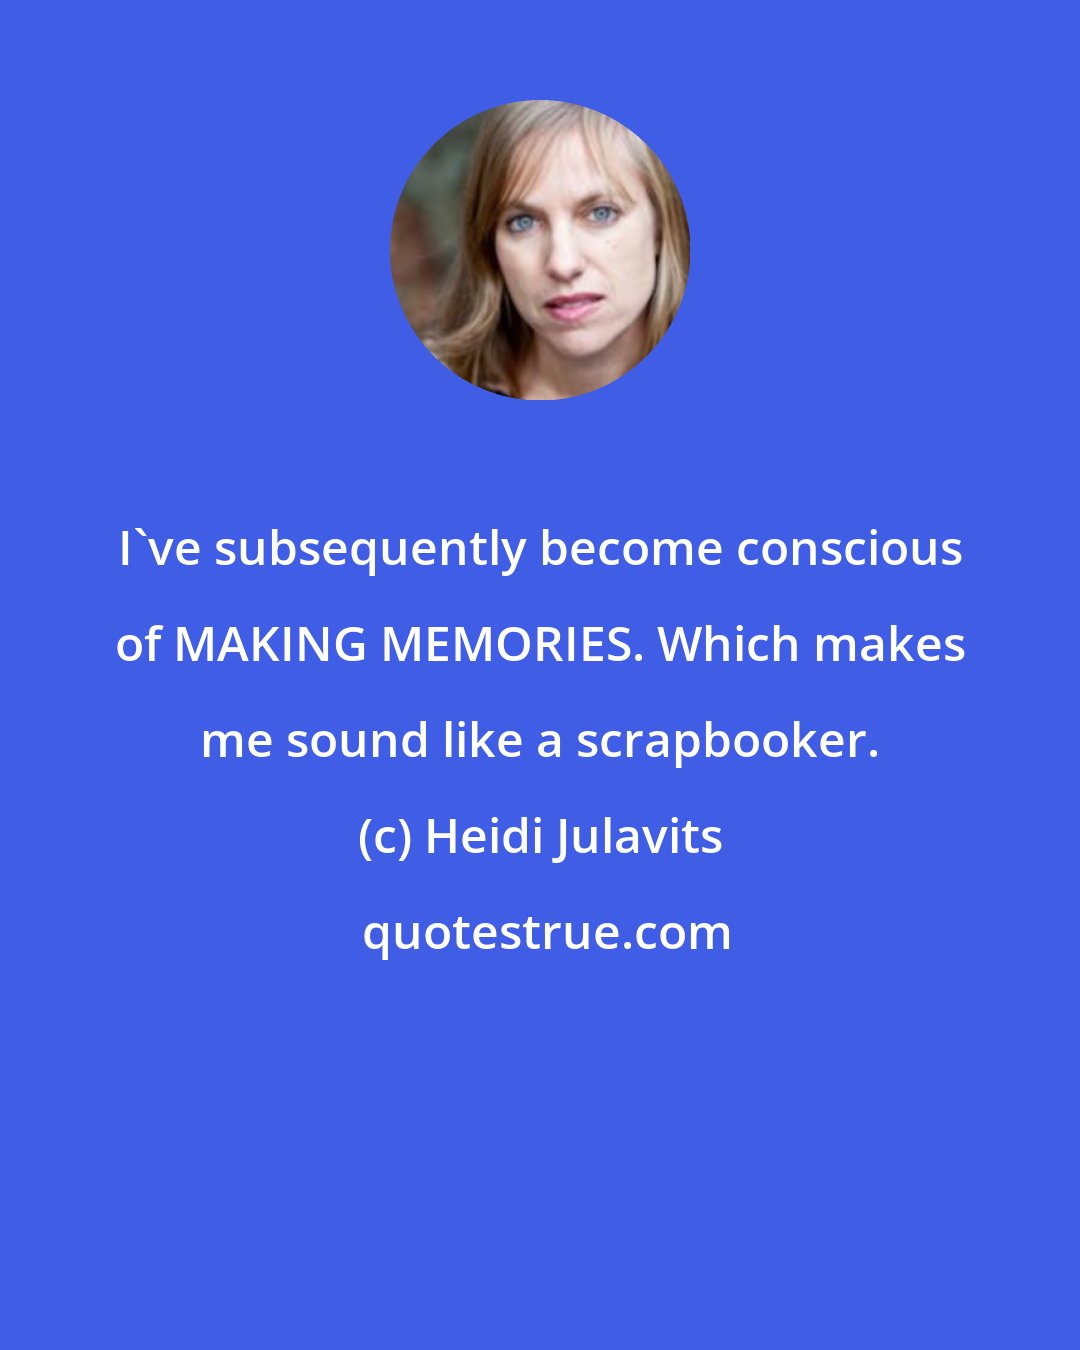 Heidi Julavits: I've subsequently become conscious of MAKING MEMORIES. Which makes me sound like a scrapbooker.